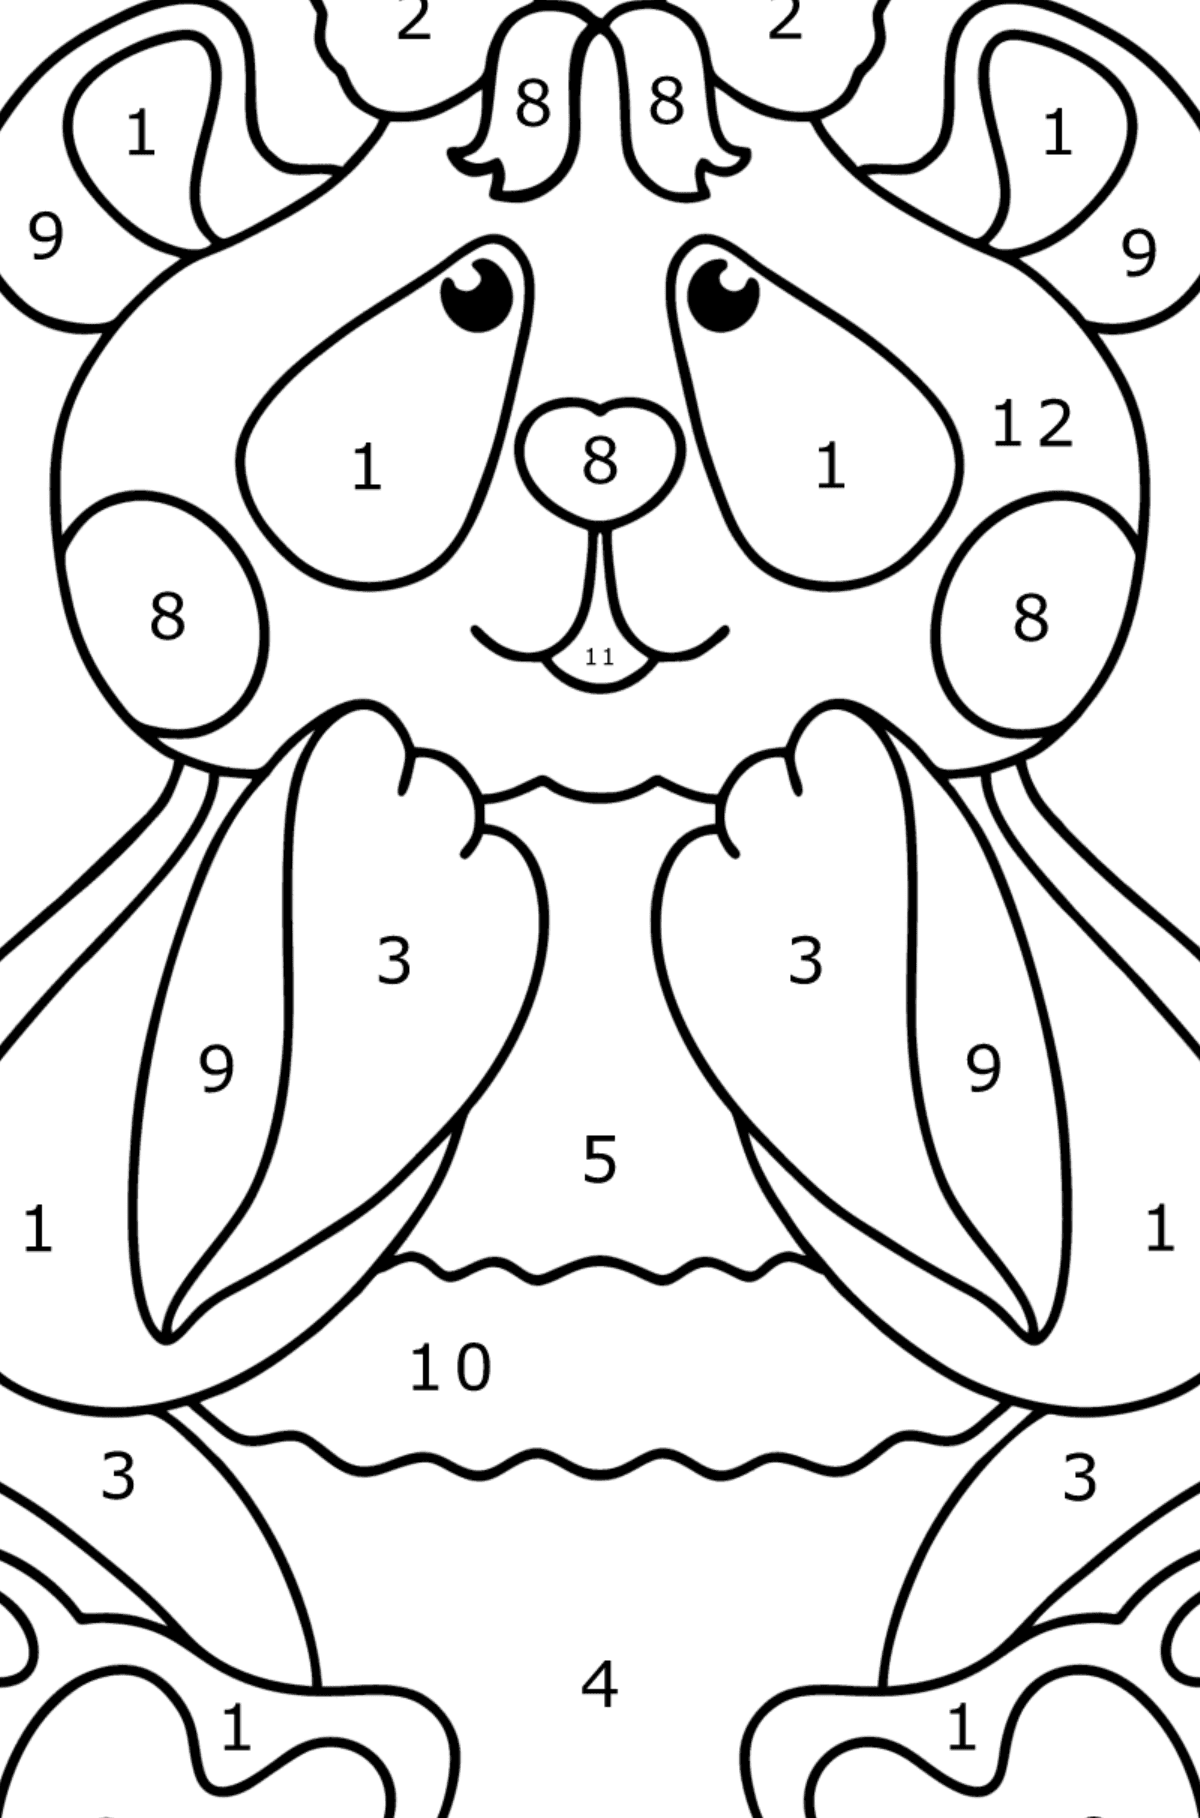 Panda baby coloring page - Coloring by Numbers for Kids